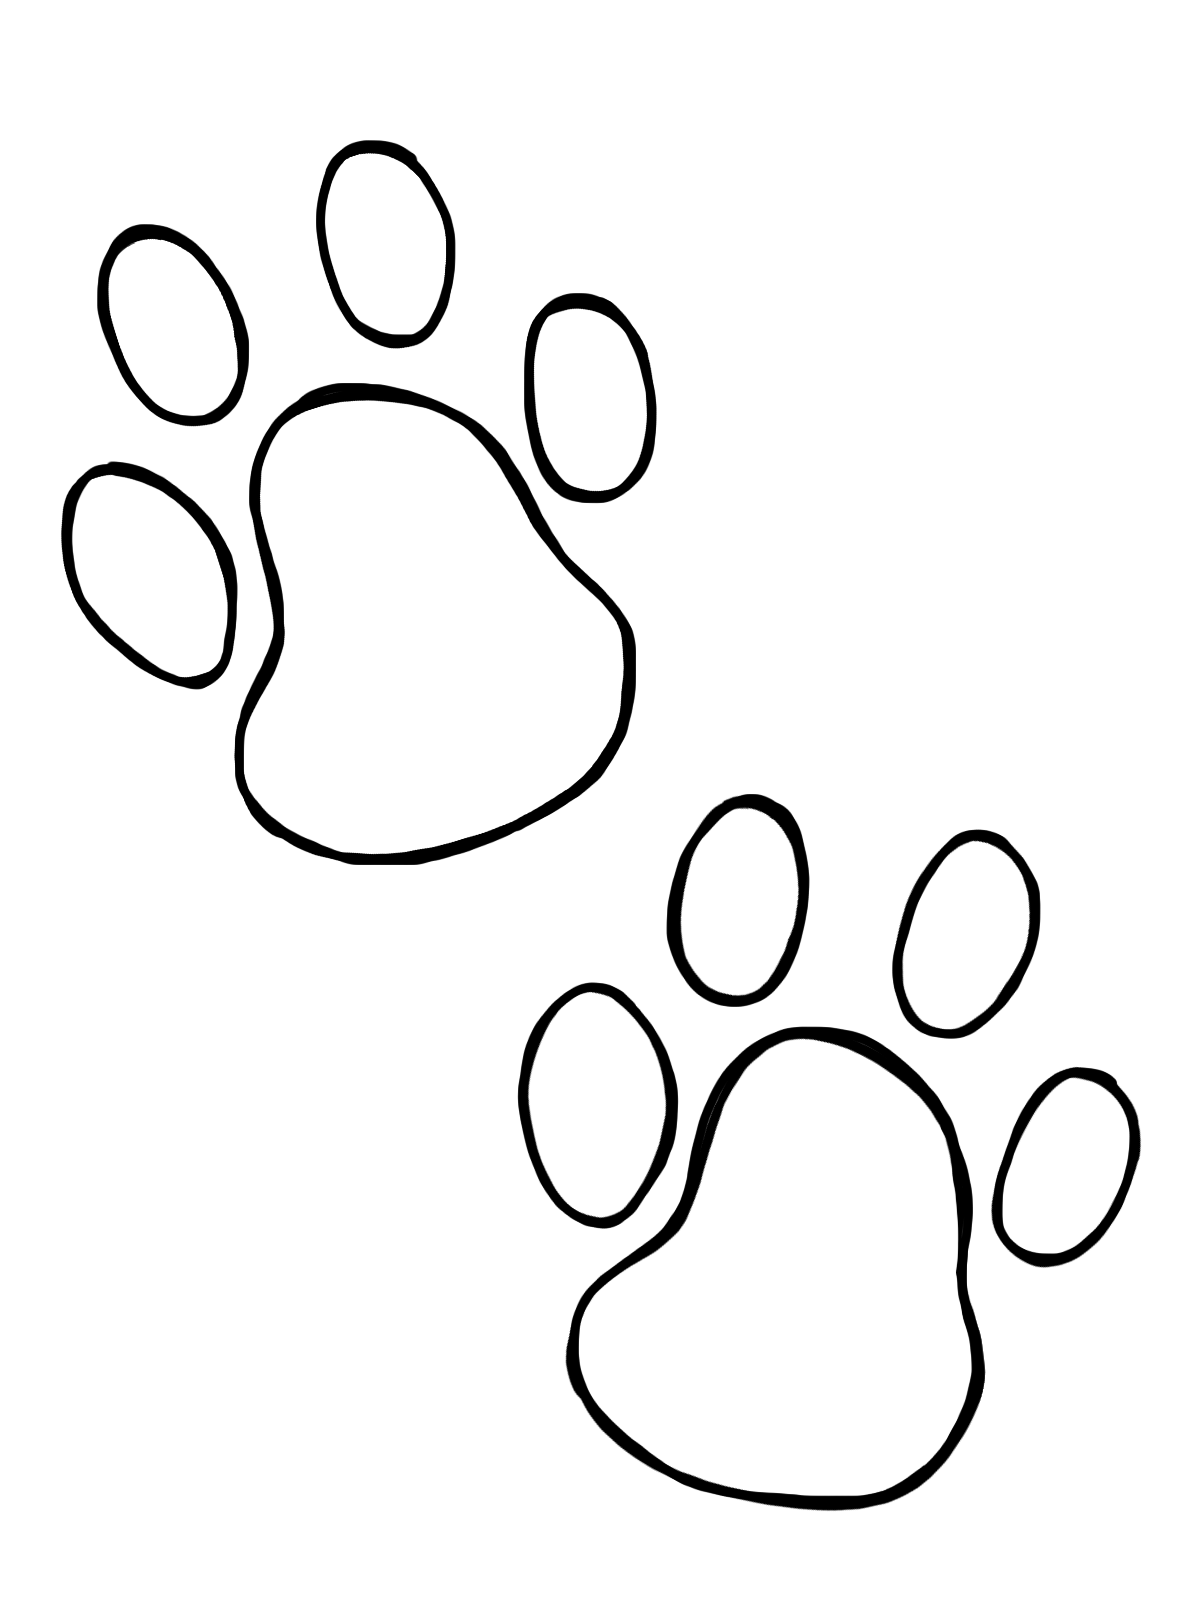 Images For > Heart Paw Print Clip Art